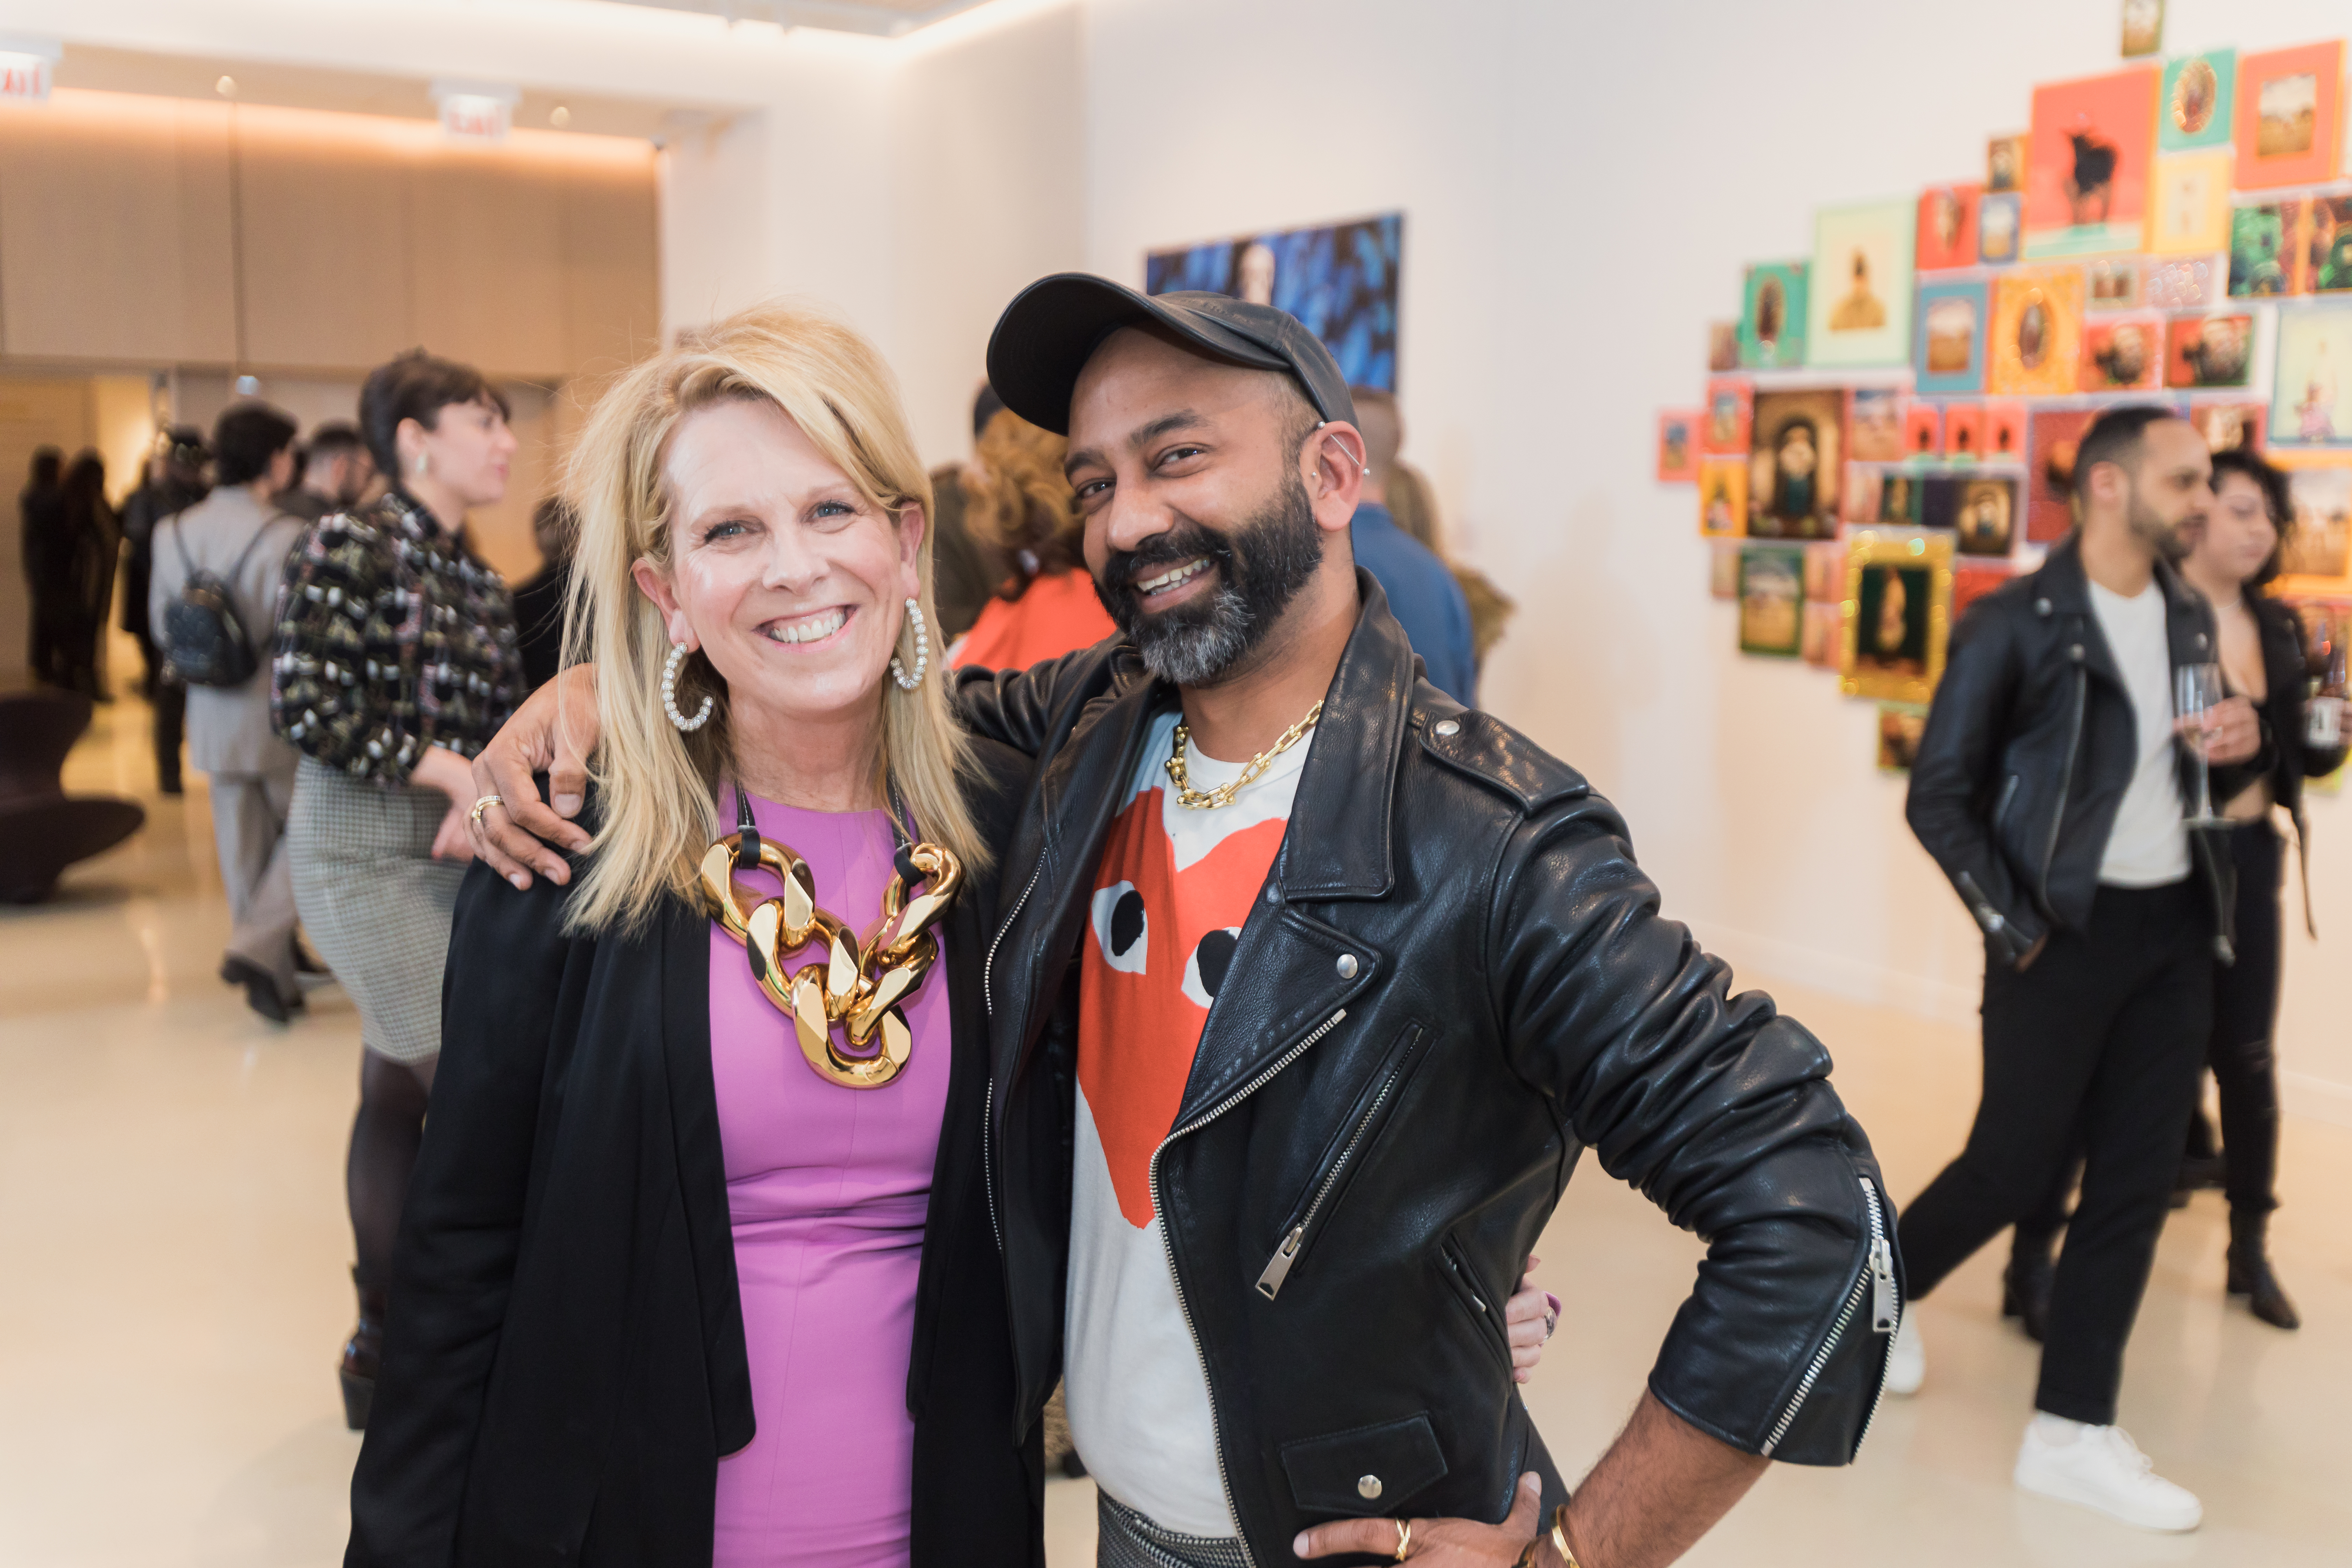 Alice_Gray_Stites_and_Brendan_Fernandes_at_21c_Museum_Hotel_Chicago_s_Pop_Stars!_Popular_Culture_and_Contemporary_Art_Exhibition_Photo_Credit_Codi_Palm.jpg